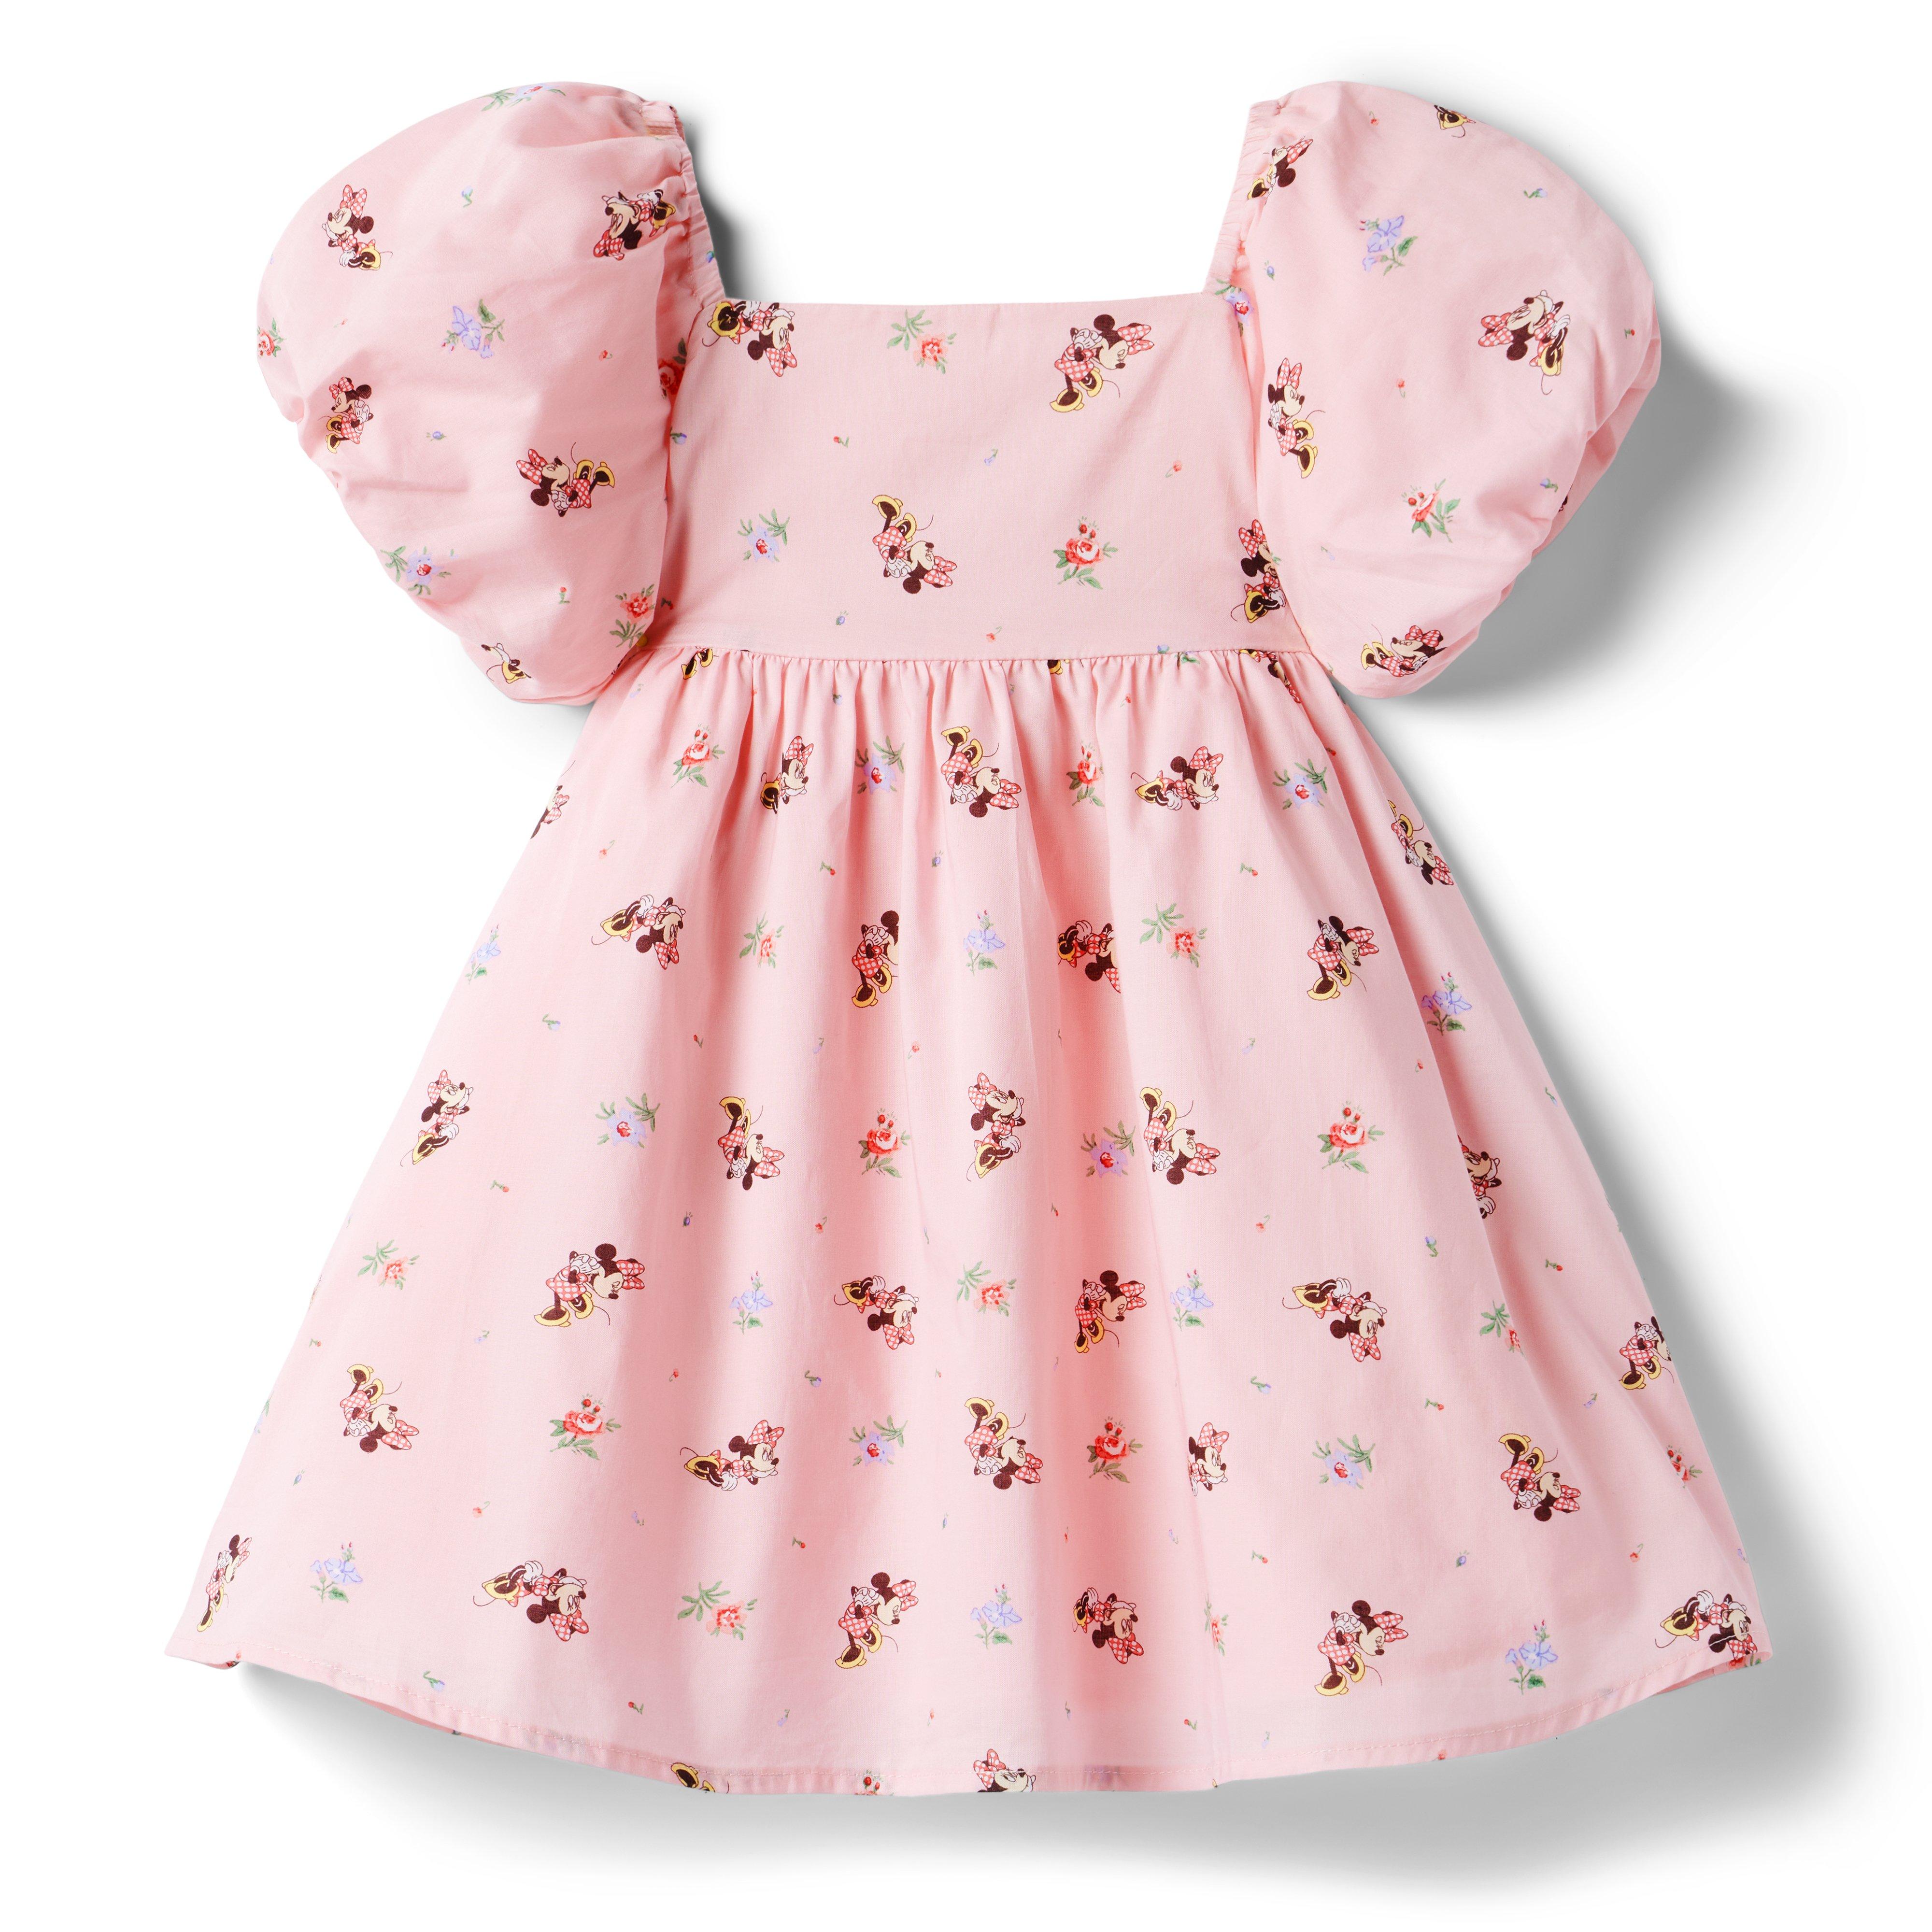 Minnie Mouse Dress - Empire Waist Size 2T-12  Minnie mouse dress, Toddler  girl shoes, Baby shoes pattern